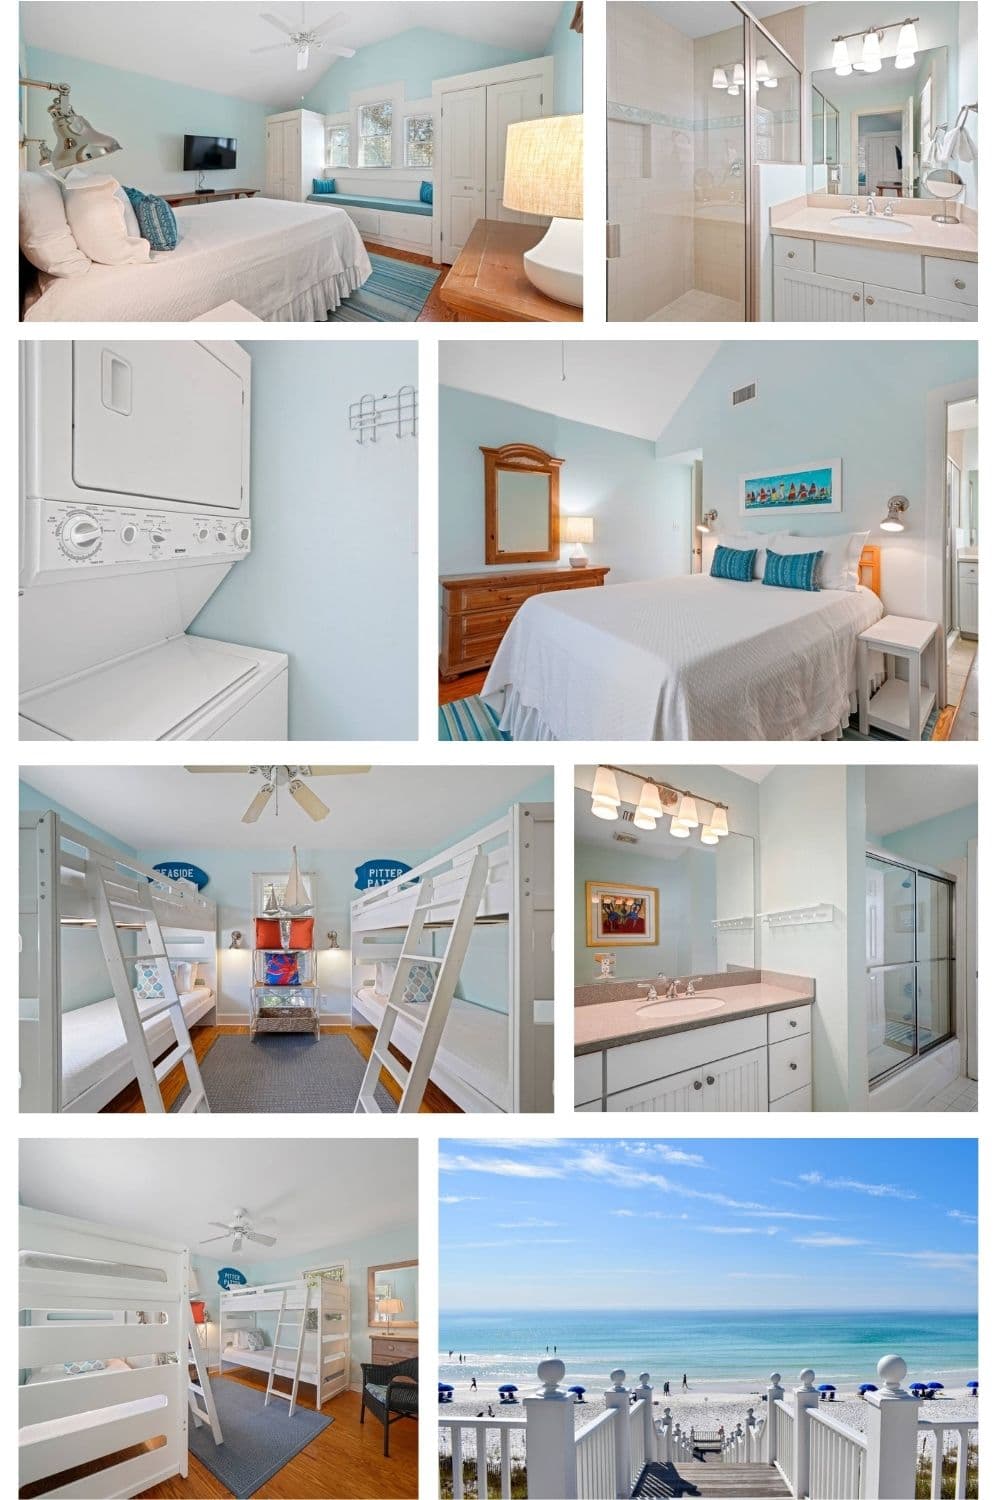 upstairs collage of Pitter Patter cottage in seaside Florida